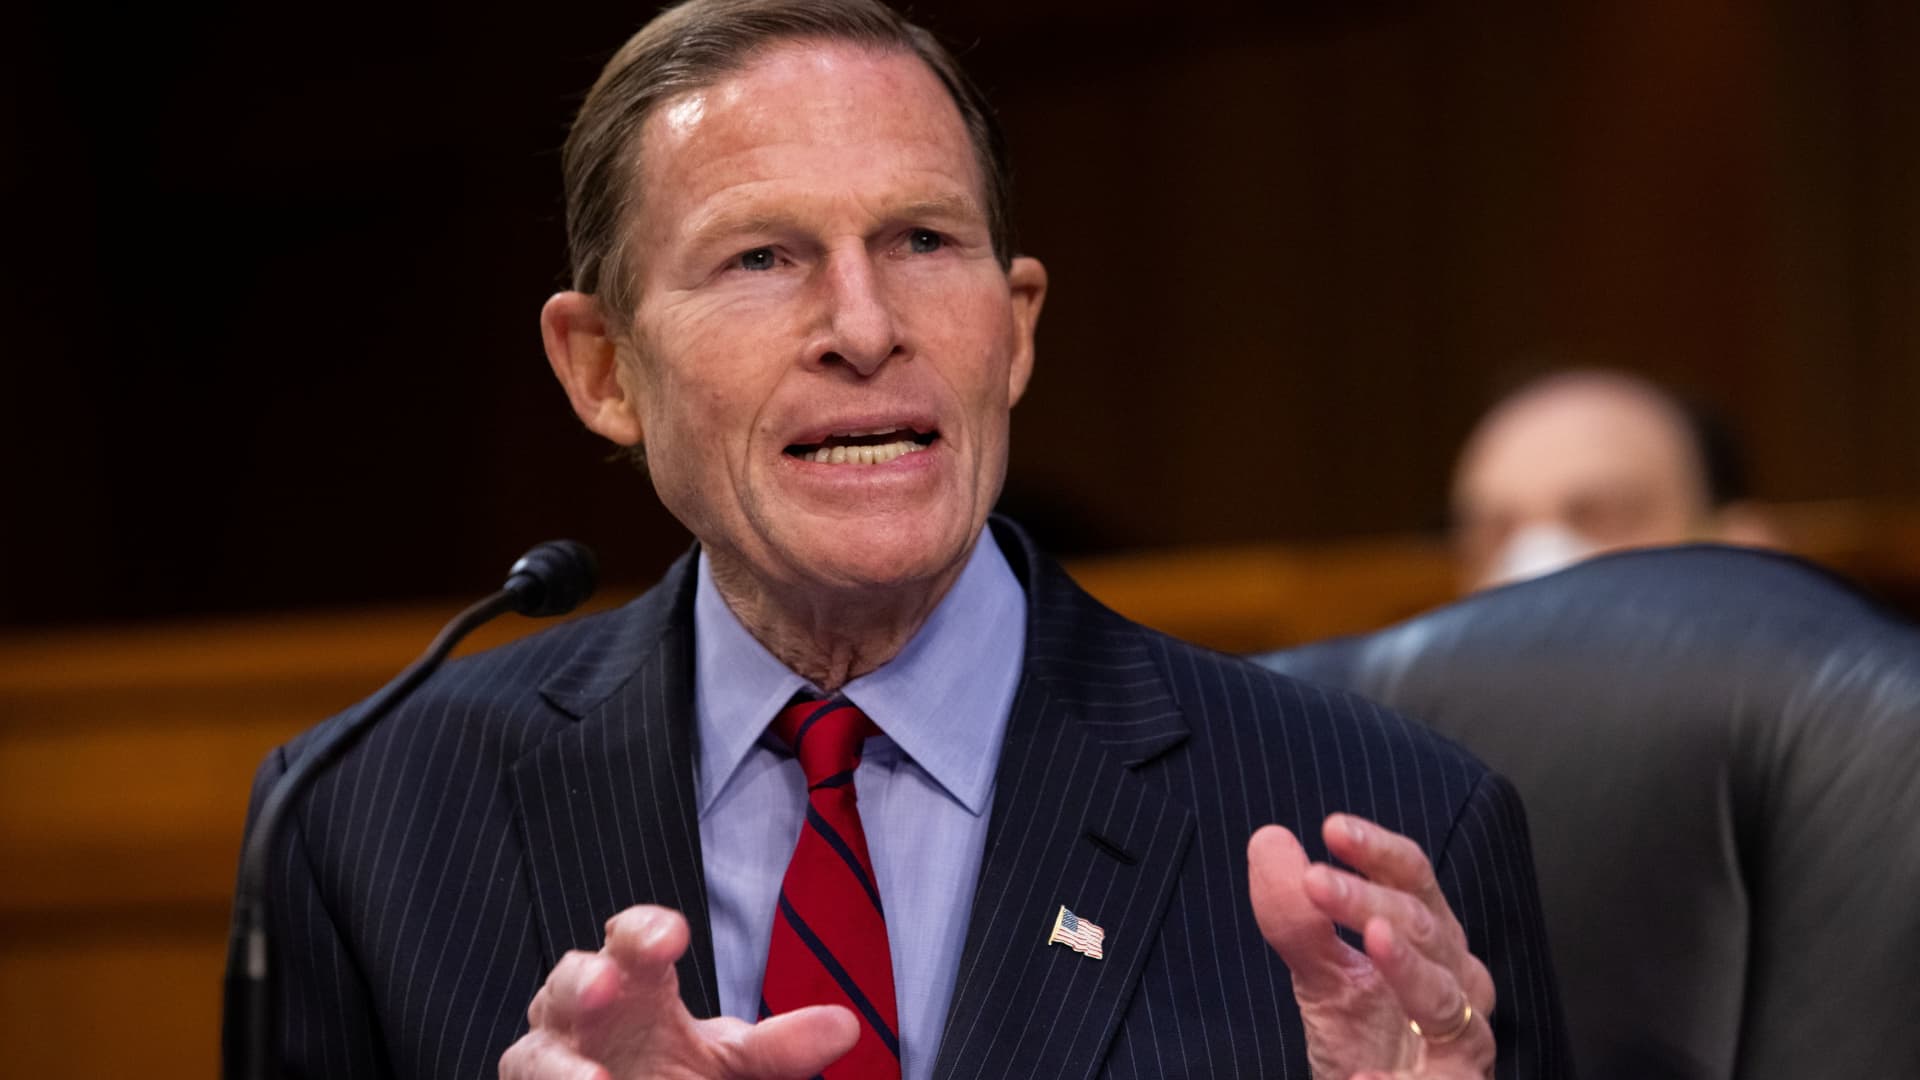 Senator Richard Blumenthal, D-CT, speaks during a Senate Judiciary Committee hearing on the January 6th insurrection, in the Hart Senate Office Building on Capitol Hill in Washington, DC, March 2, 2021.